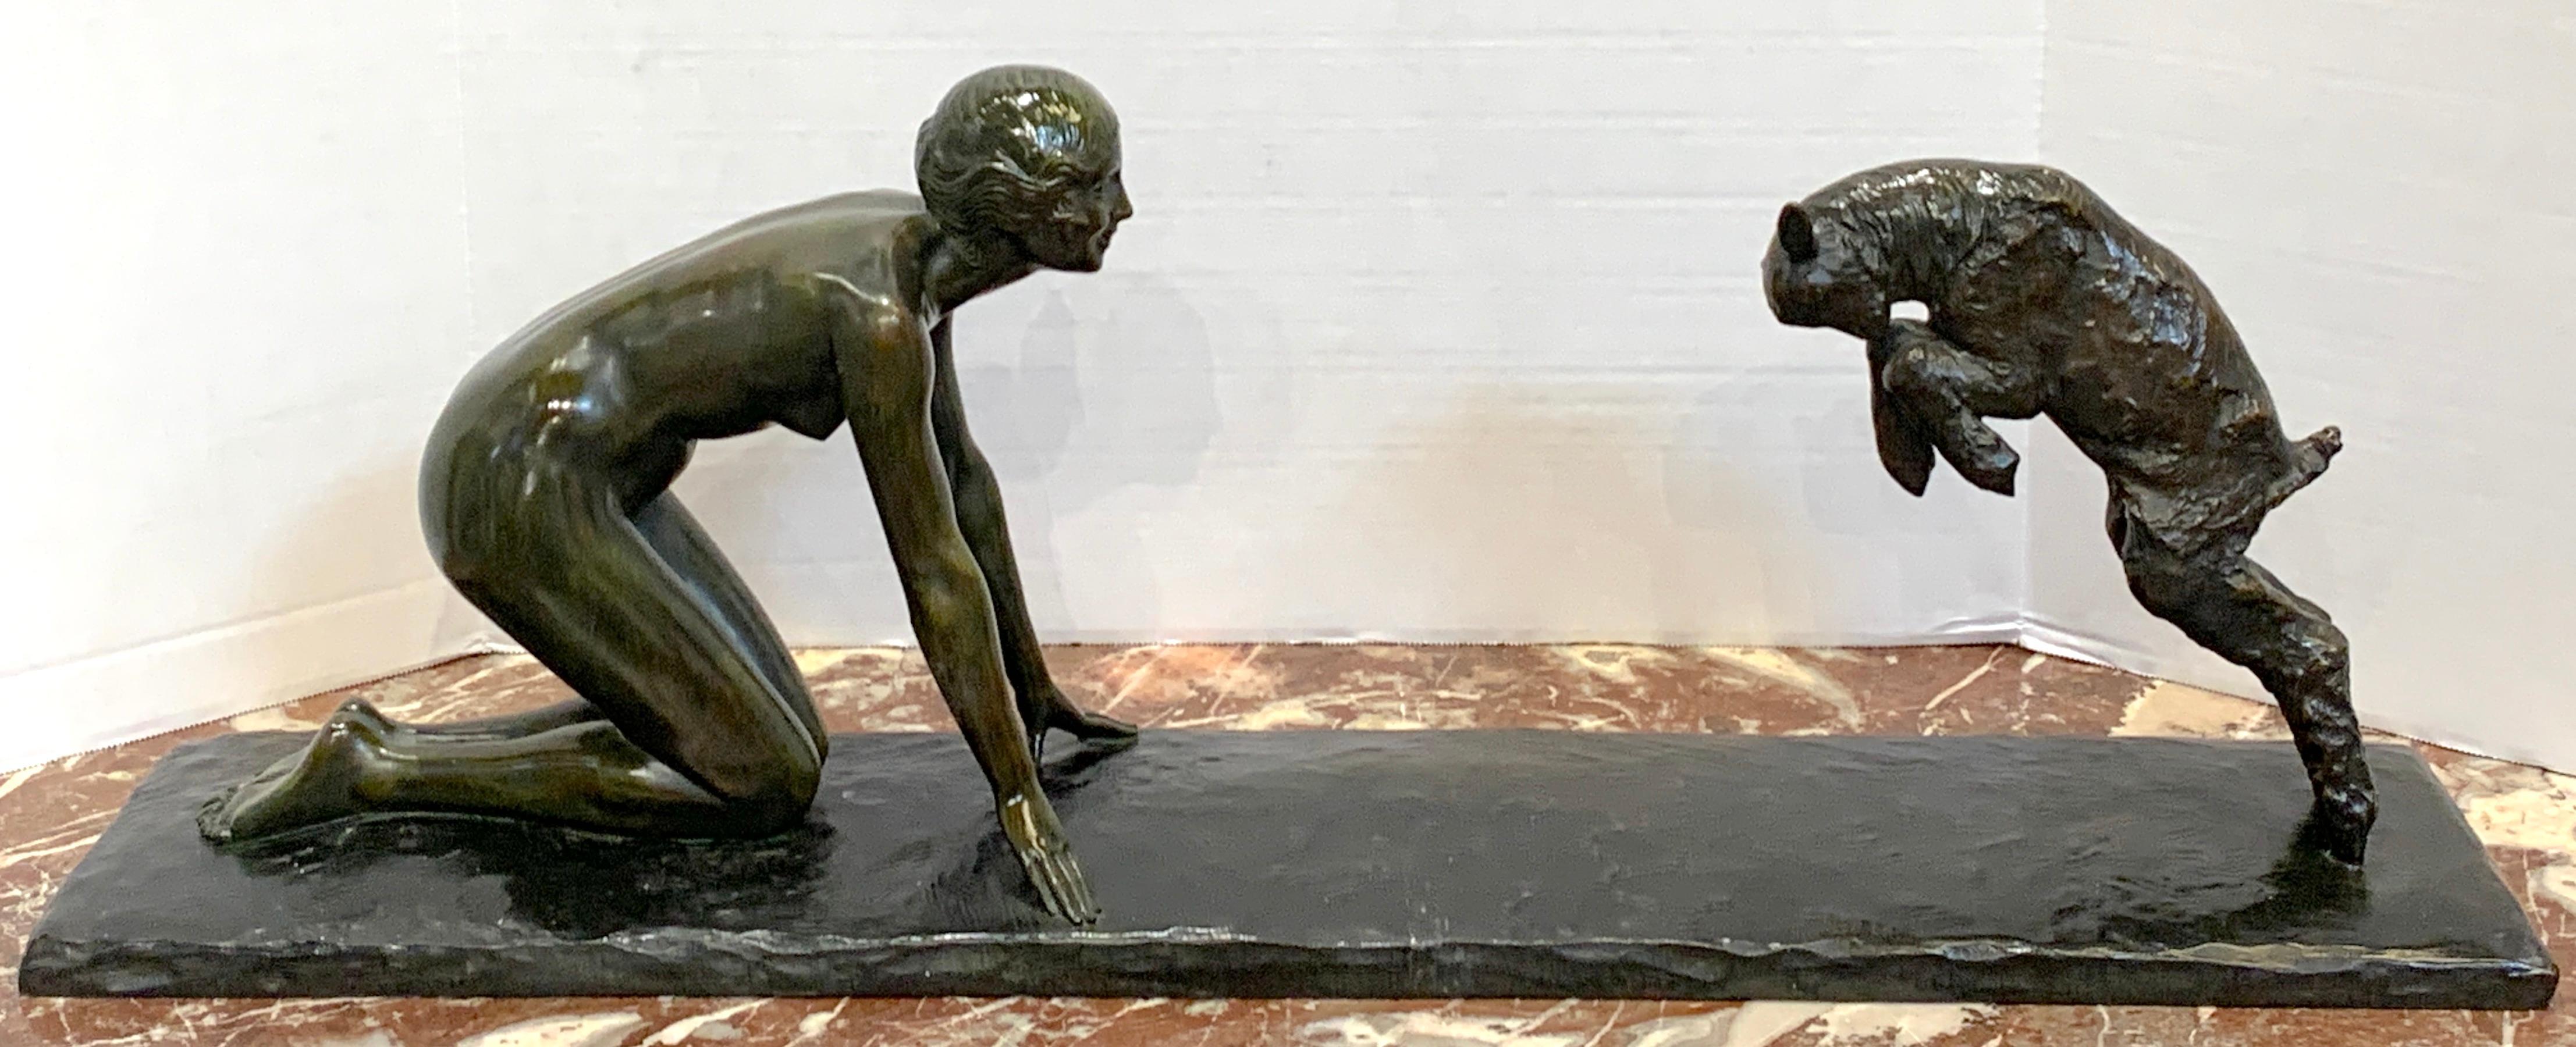 'Girl and Jumping Goat' by Paul Silvestre, Susse Freres Foundry, France, circa 1925

This fine French Art Deco bronze sculpture, 'Girl and Jumping Goat' by Paul Silvestre, cast by Susse Frères Foundry circa 1925, stands as a quintessential